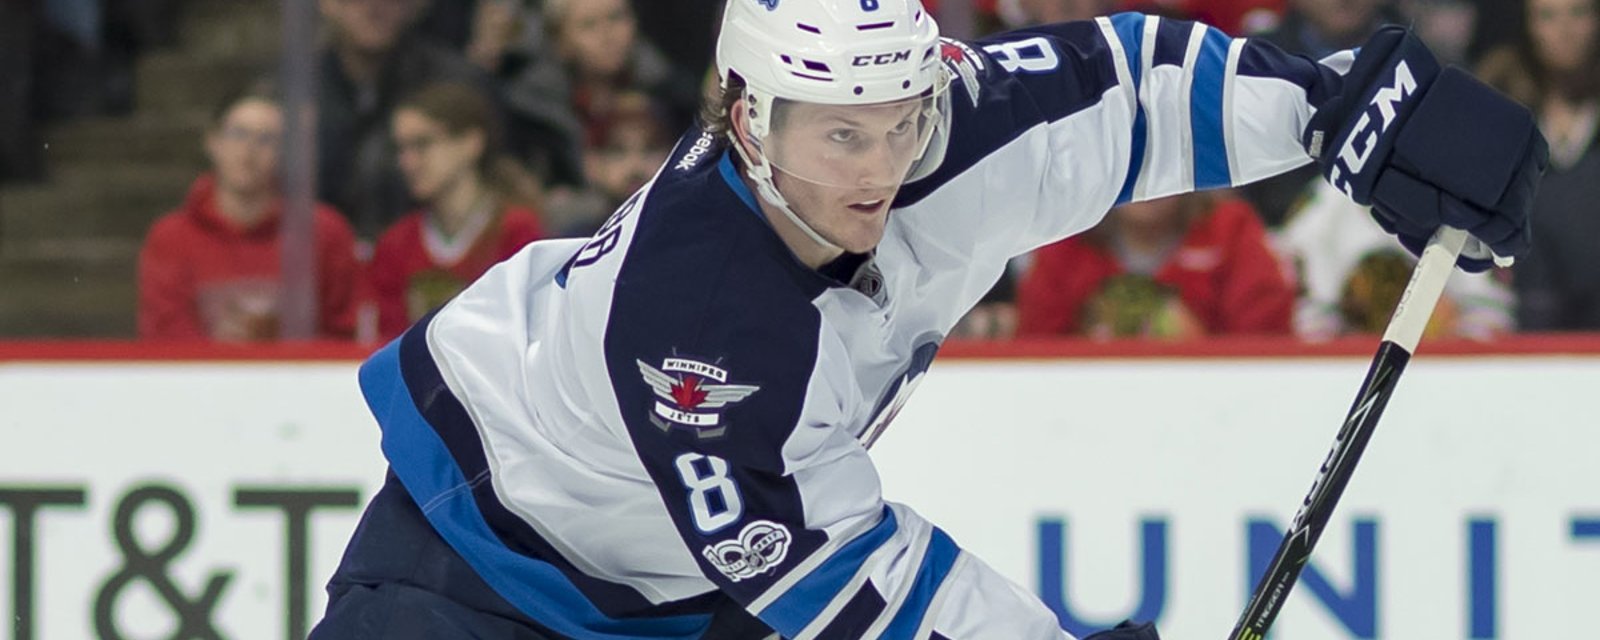 Rumor: Jets looking to trade Trouba to avoid another messy situation! 